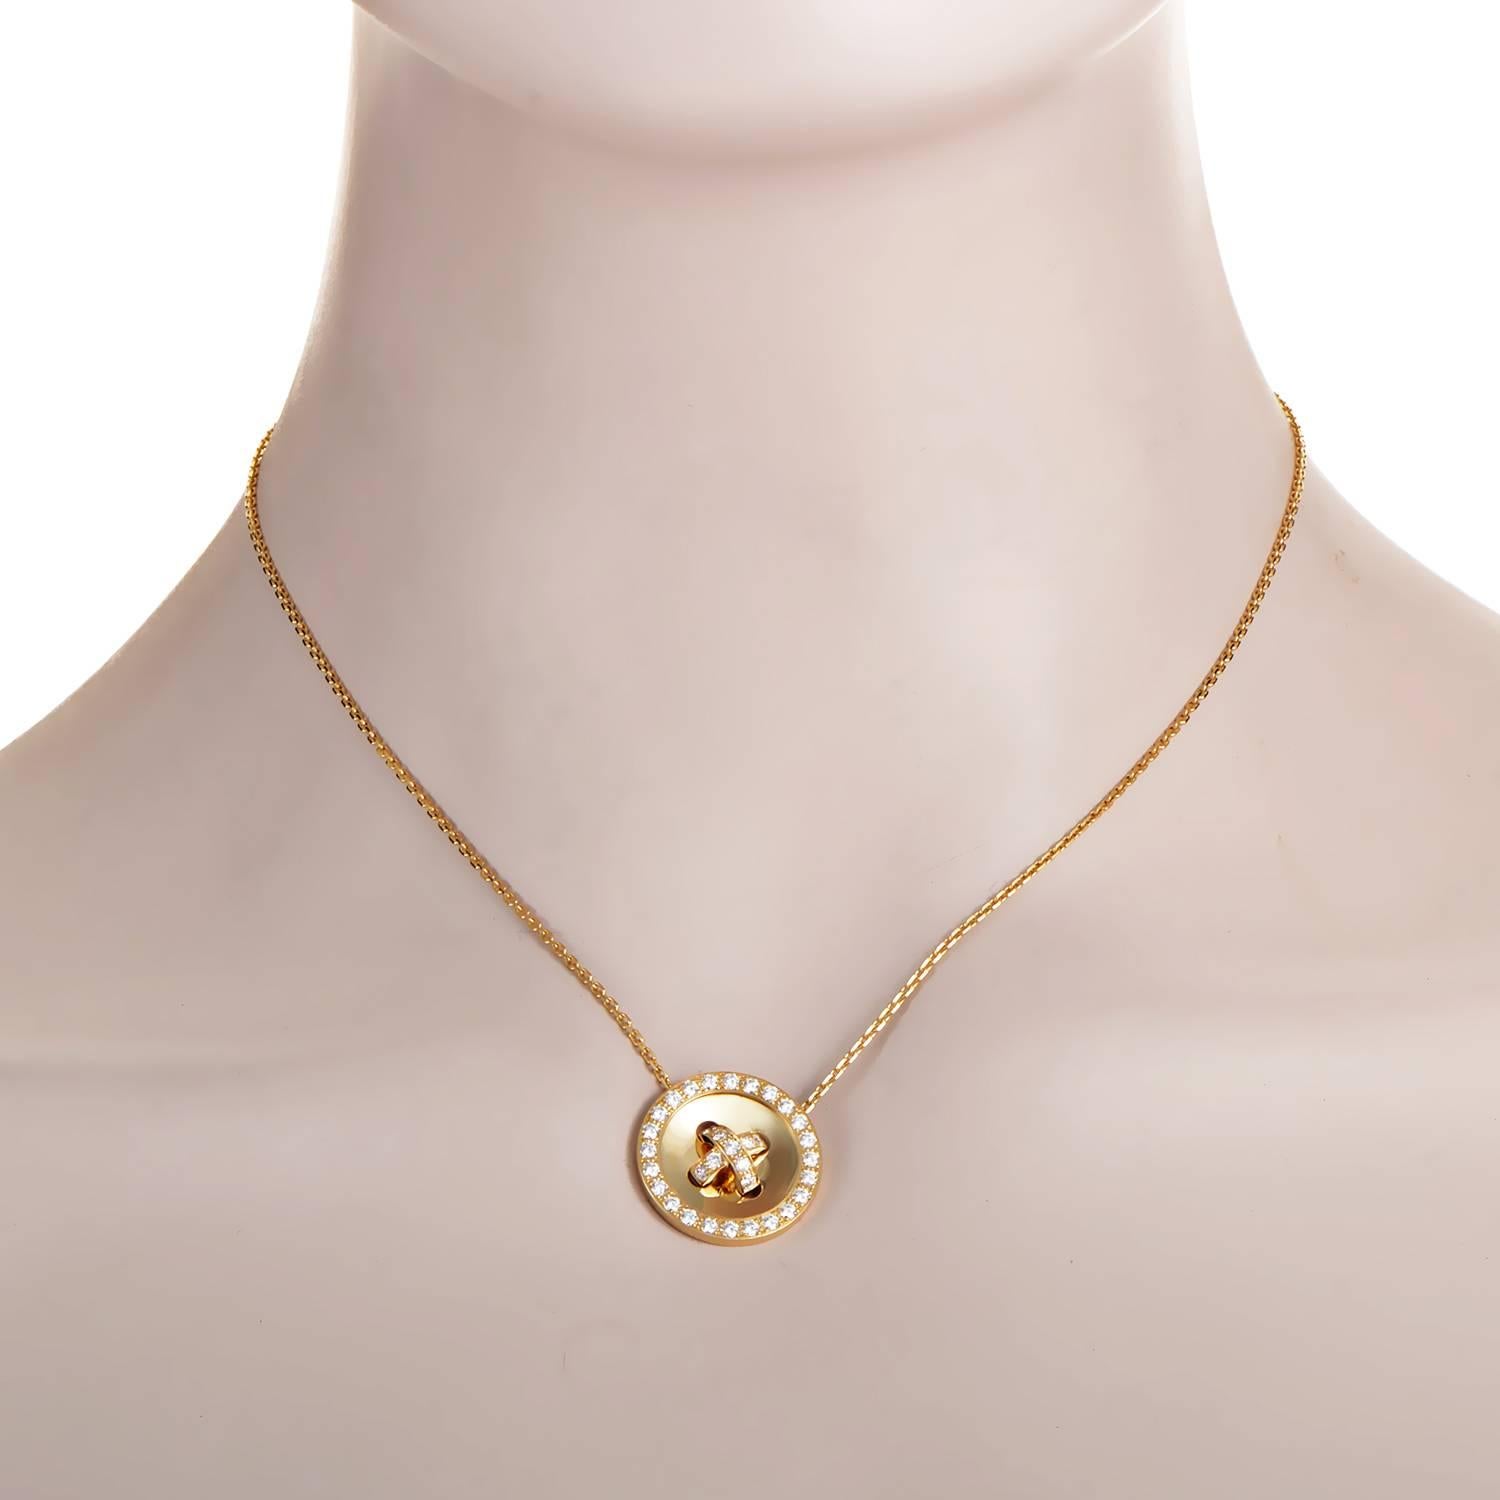 Fascinating play of light upon the scintillating diamonds weighing in total 1.10 carats and the incredibly smooth central part of the round pendant graces this delightful 18K yellow gold necklace from Van Cleef & Arpels with irresistible